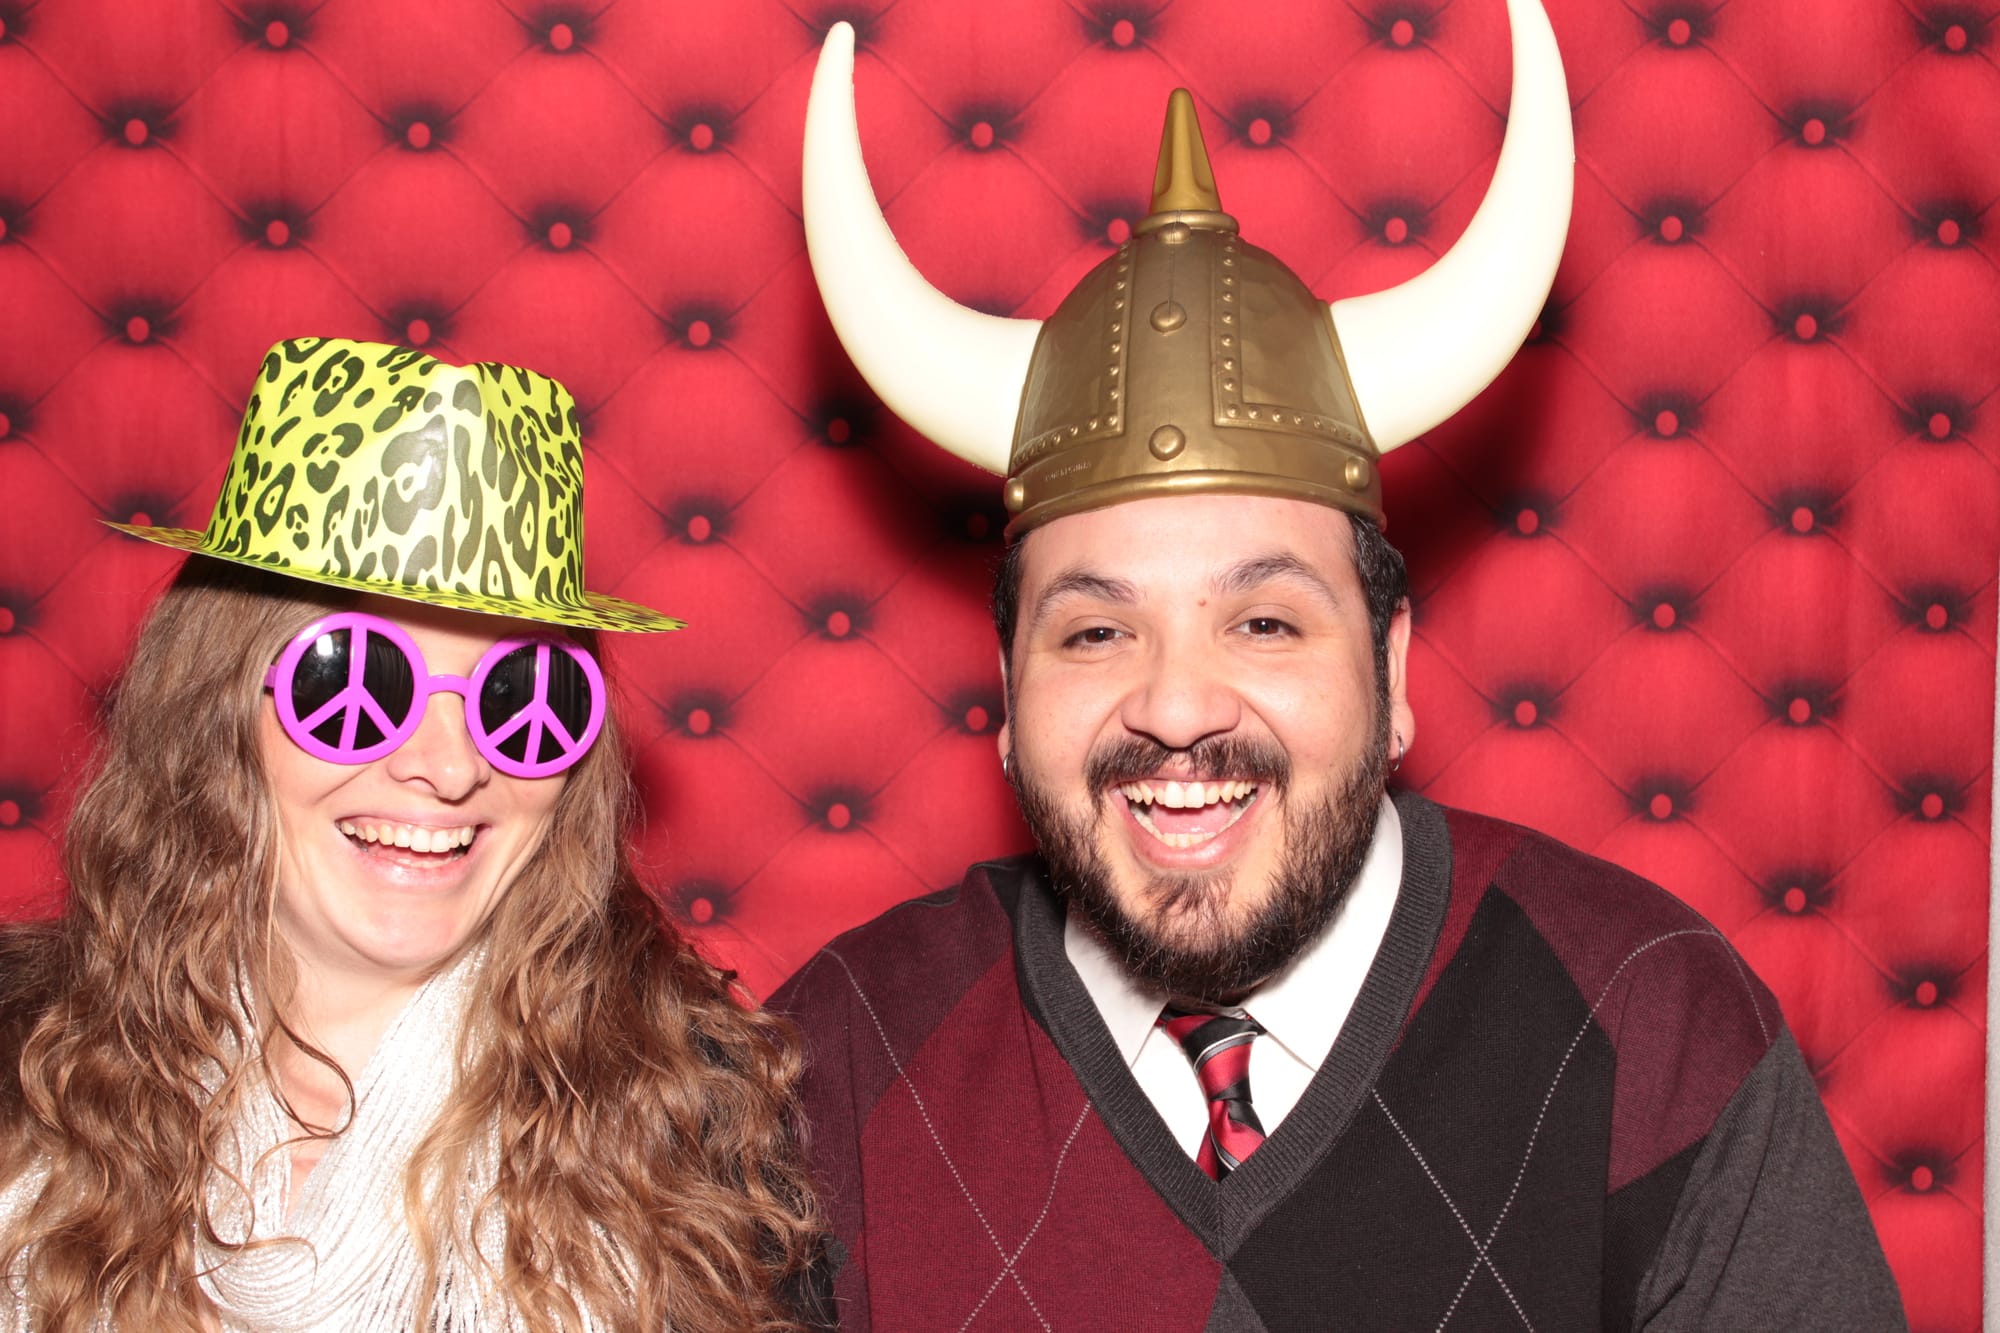 Holiday-PartyPhotobooth-Rental-Company-Corporate-No. 1-Backdrops-Photography-LGBT-Professional-Quality